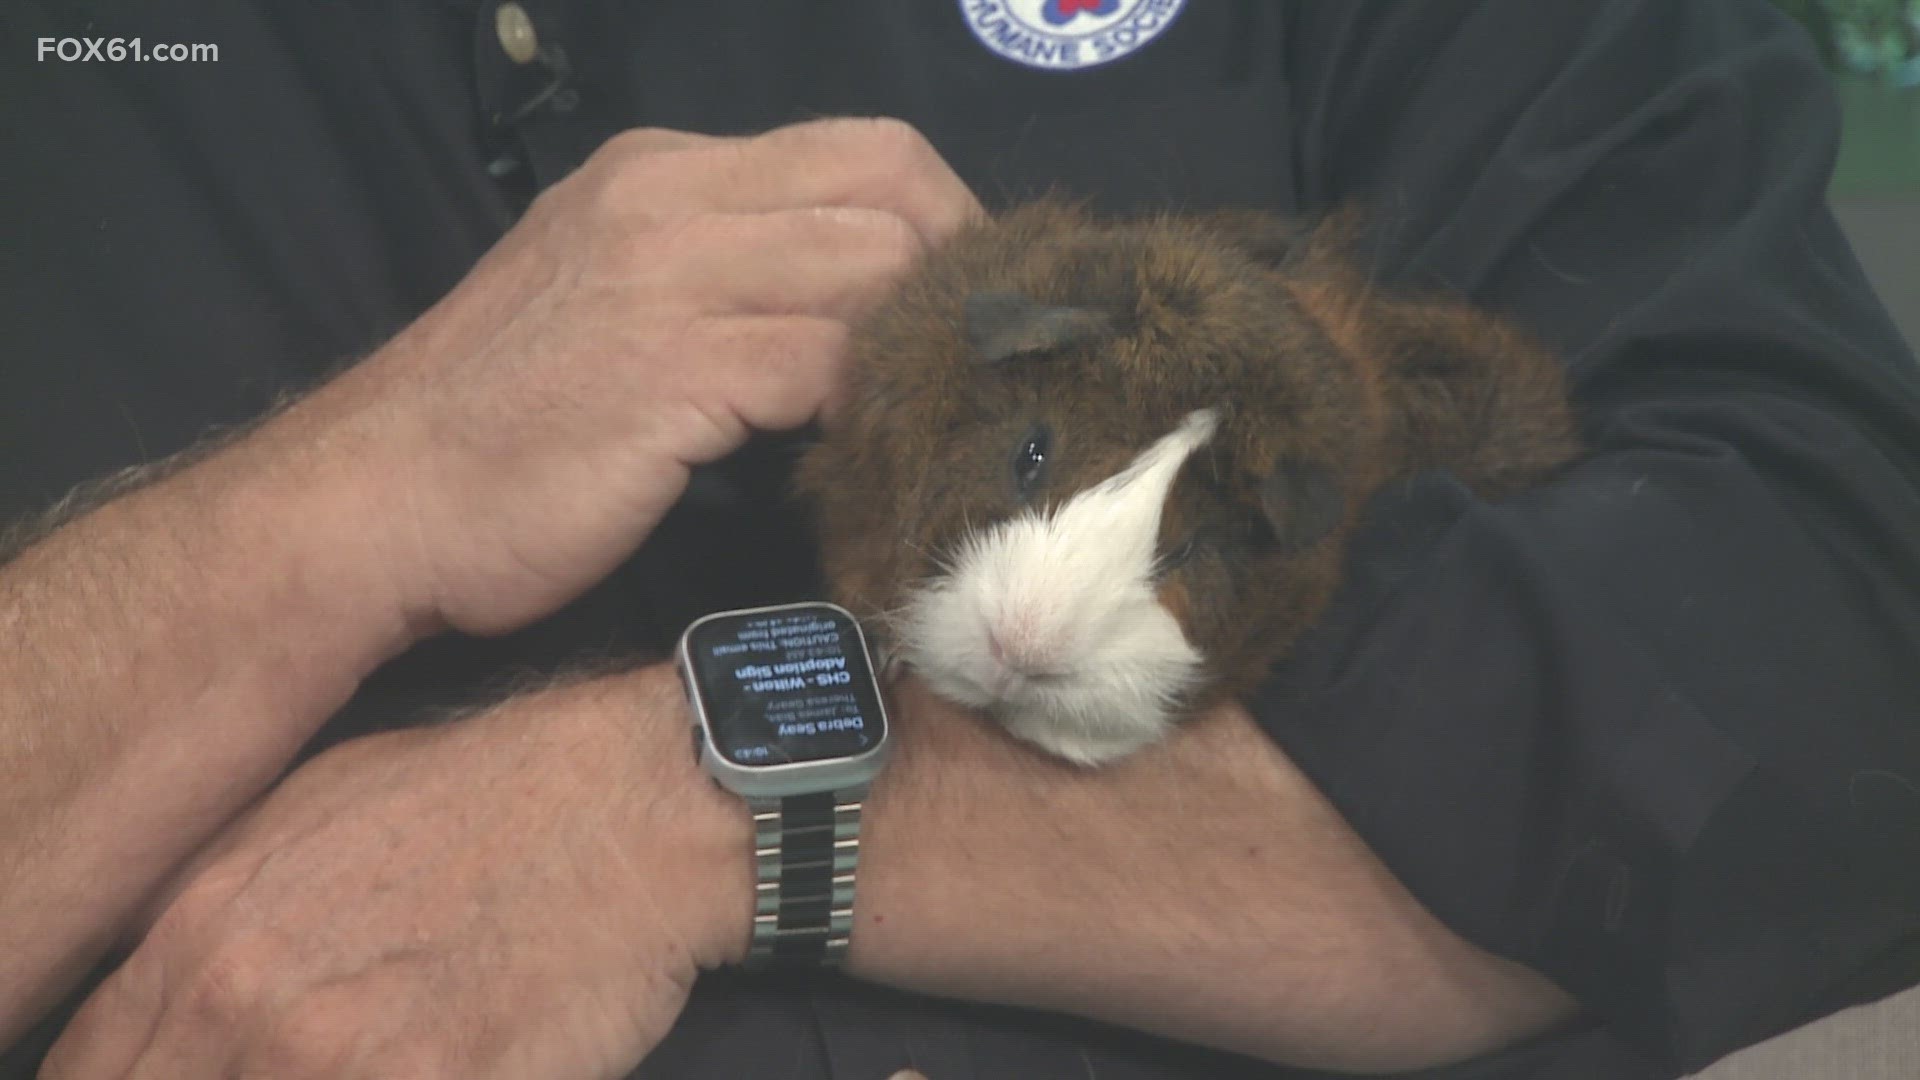 Meet Tater Tot, the Guinea pig who is looking for his forever home!  He's up for adoption at CT Humane Society.